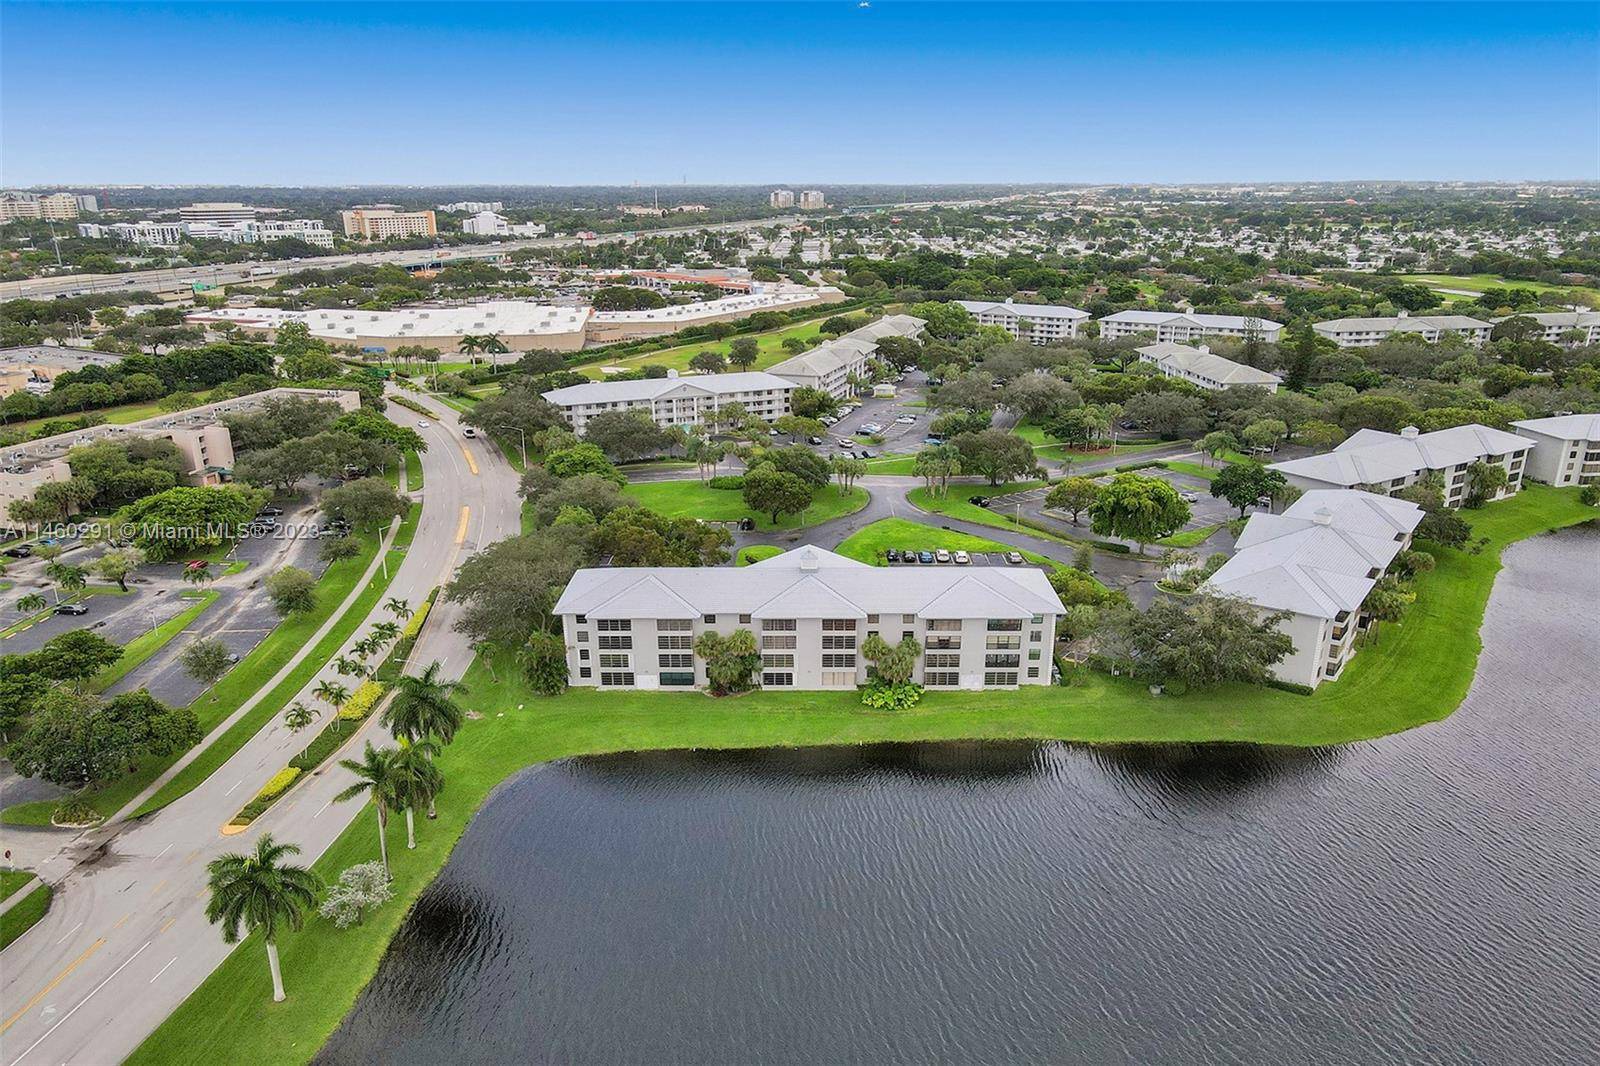 4TH FLOOR WHITEHALL 1 CONDO LOCATED IN THE PRIVATE COUNTRY CLUB COMMUNITY OF PINE ISLAND RIDGE, AN ALL AGE COMMUNITY !